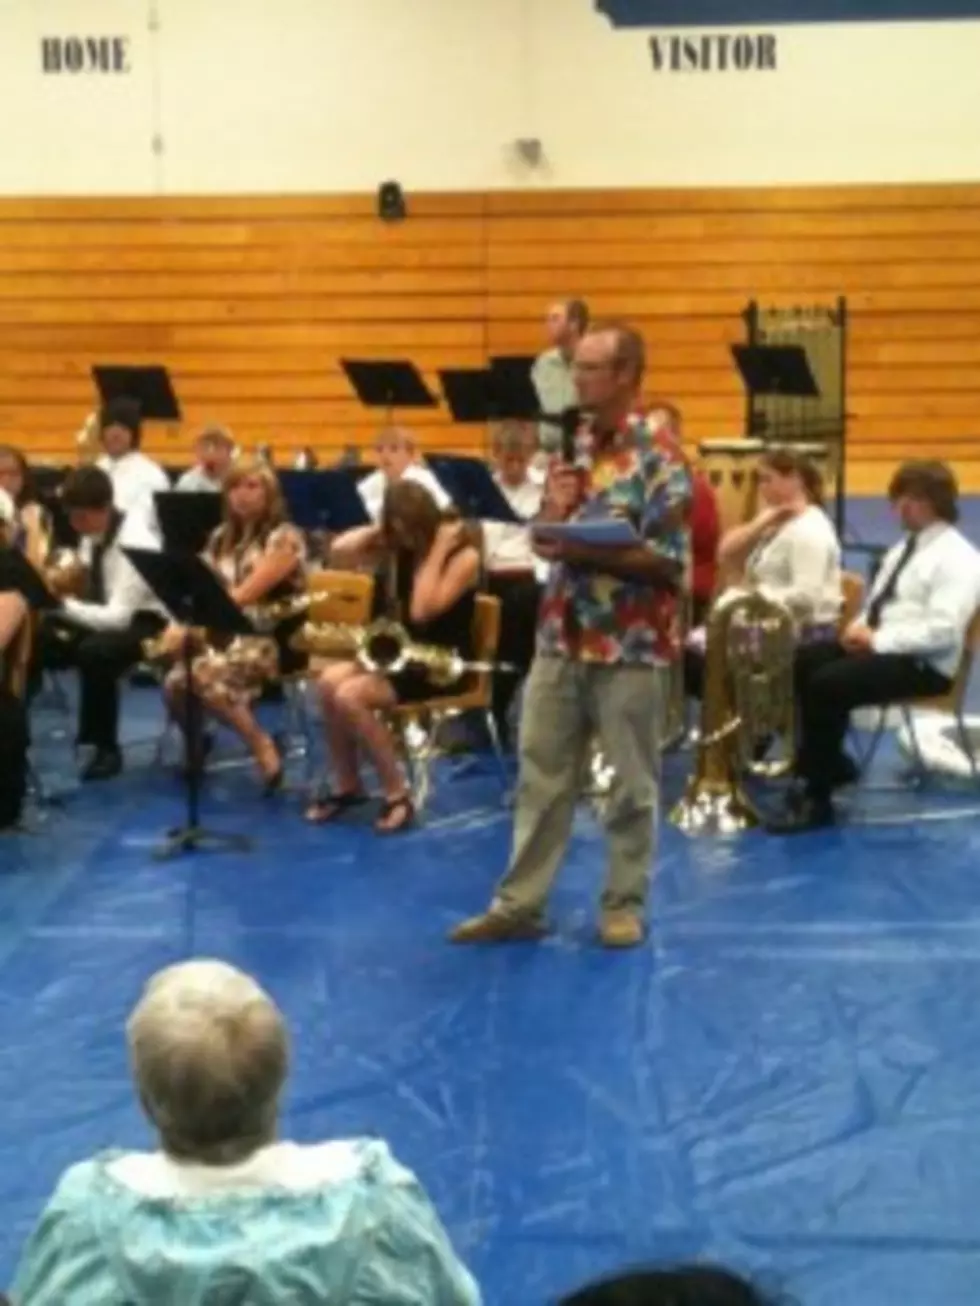 A Great Evening With the Naches Valley High School Band